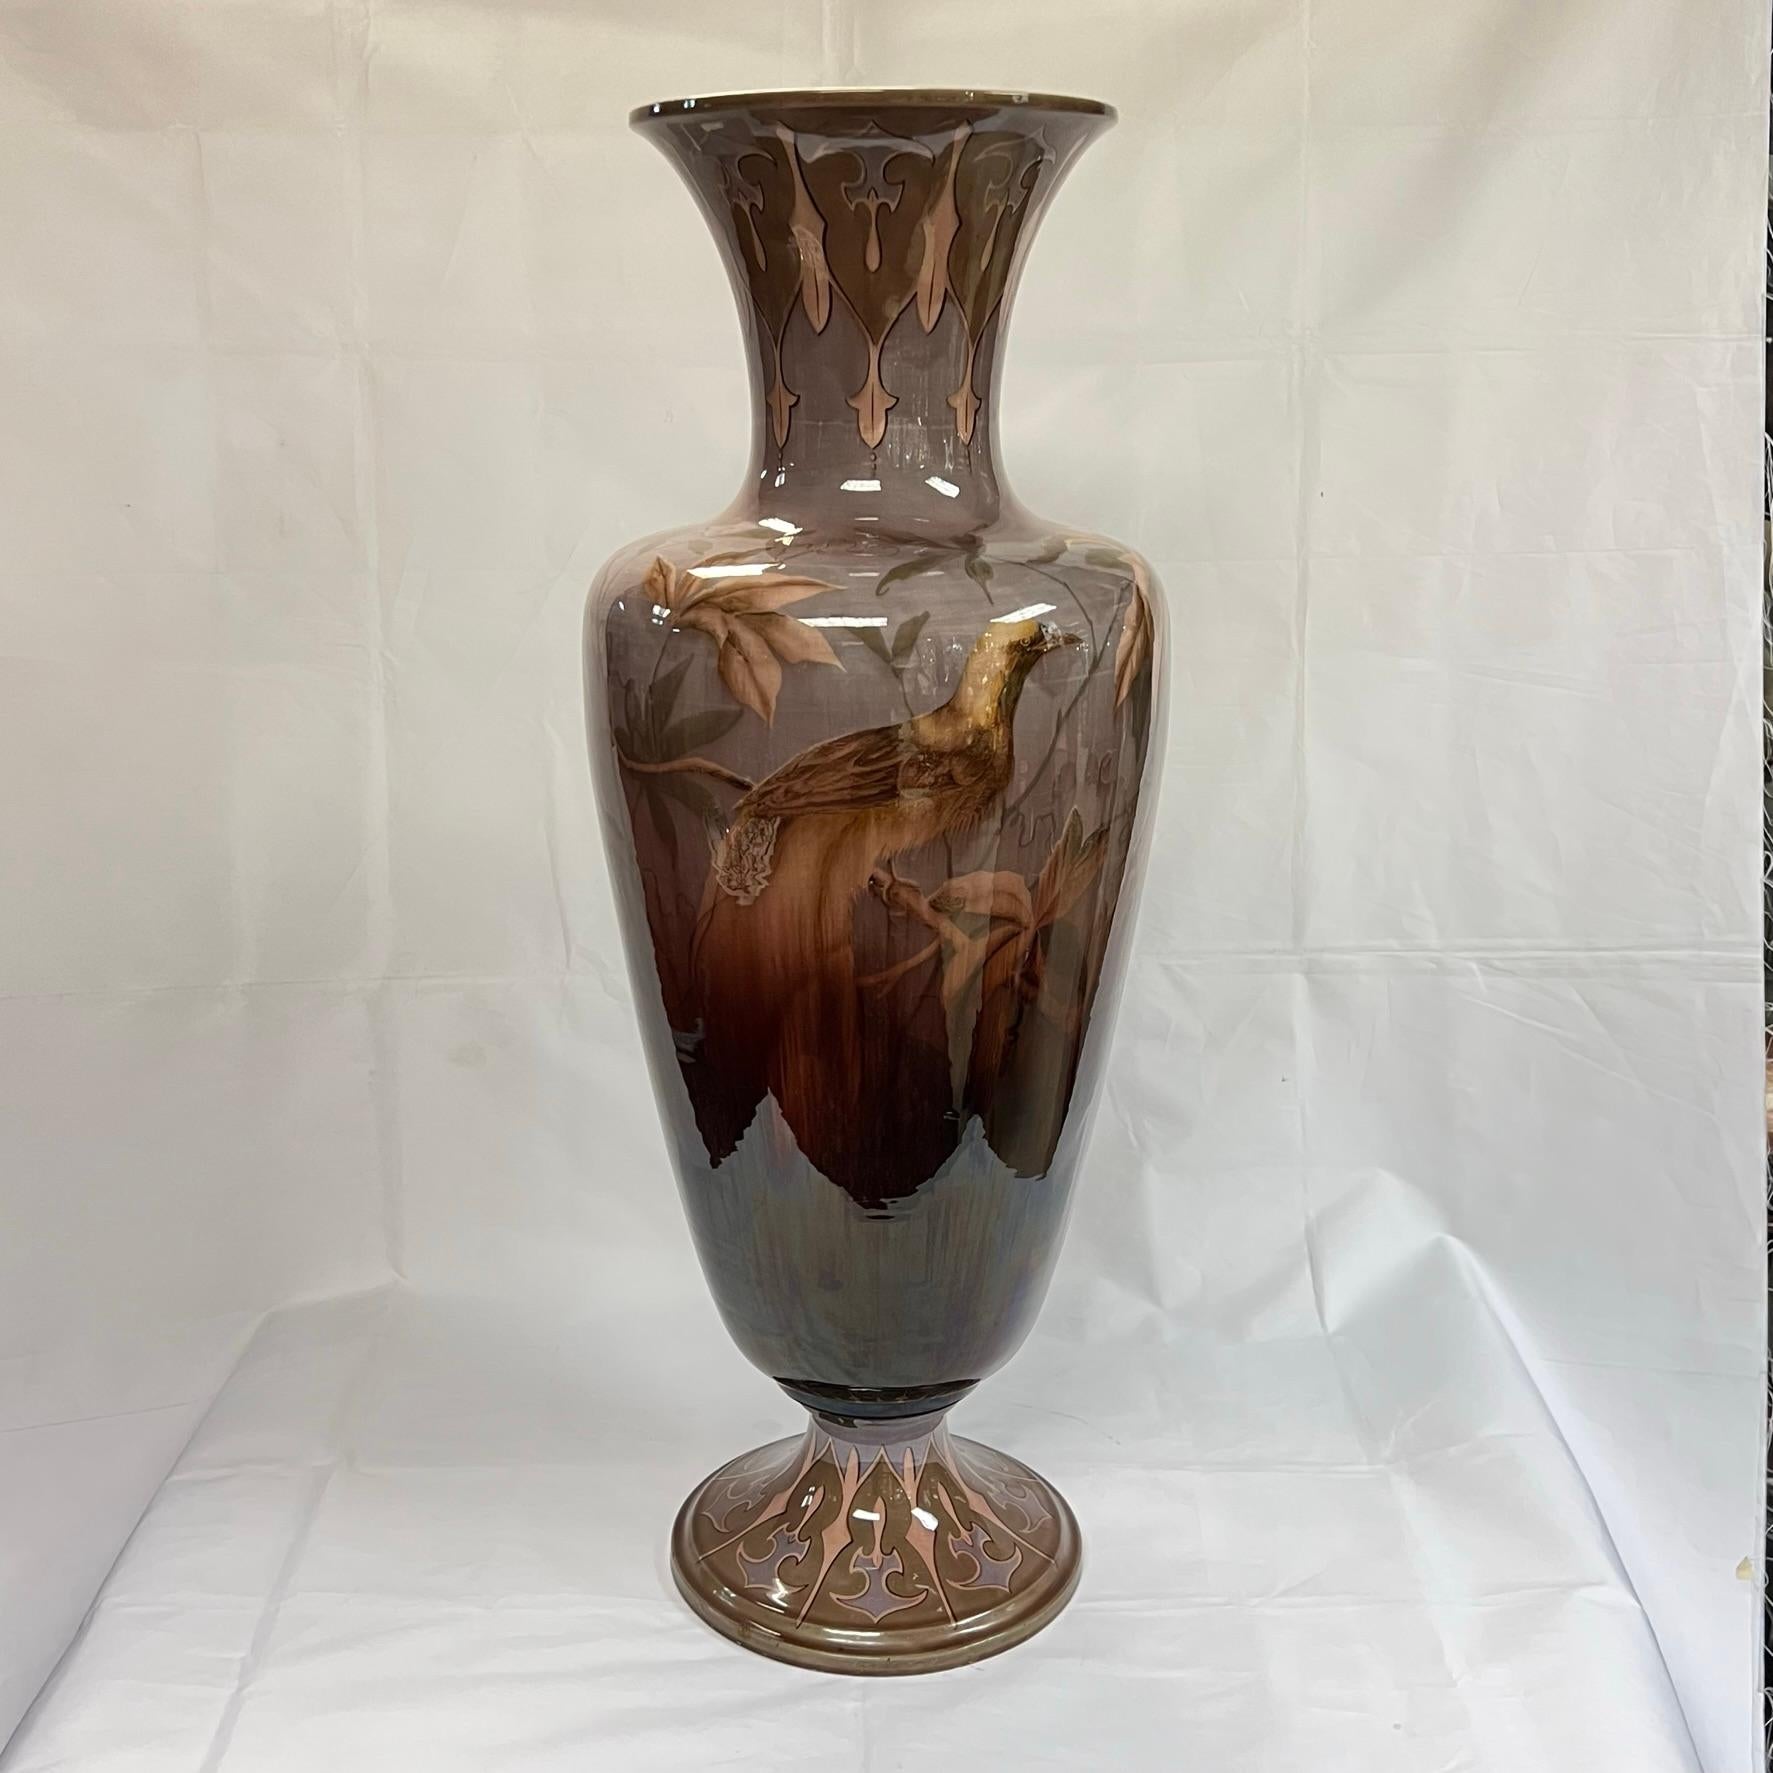 Monumental Art Nouveau period ceramic vase by the Austrian firm of Gerbing and Stephan, circa 1890s, measuring 32.5 inches and depicting exotic birds, finely painted and glazed.  Underside stamped F&AG, the mark the firm adopted in the early 1890s. 